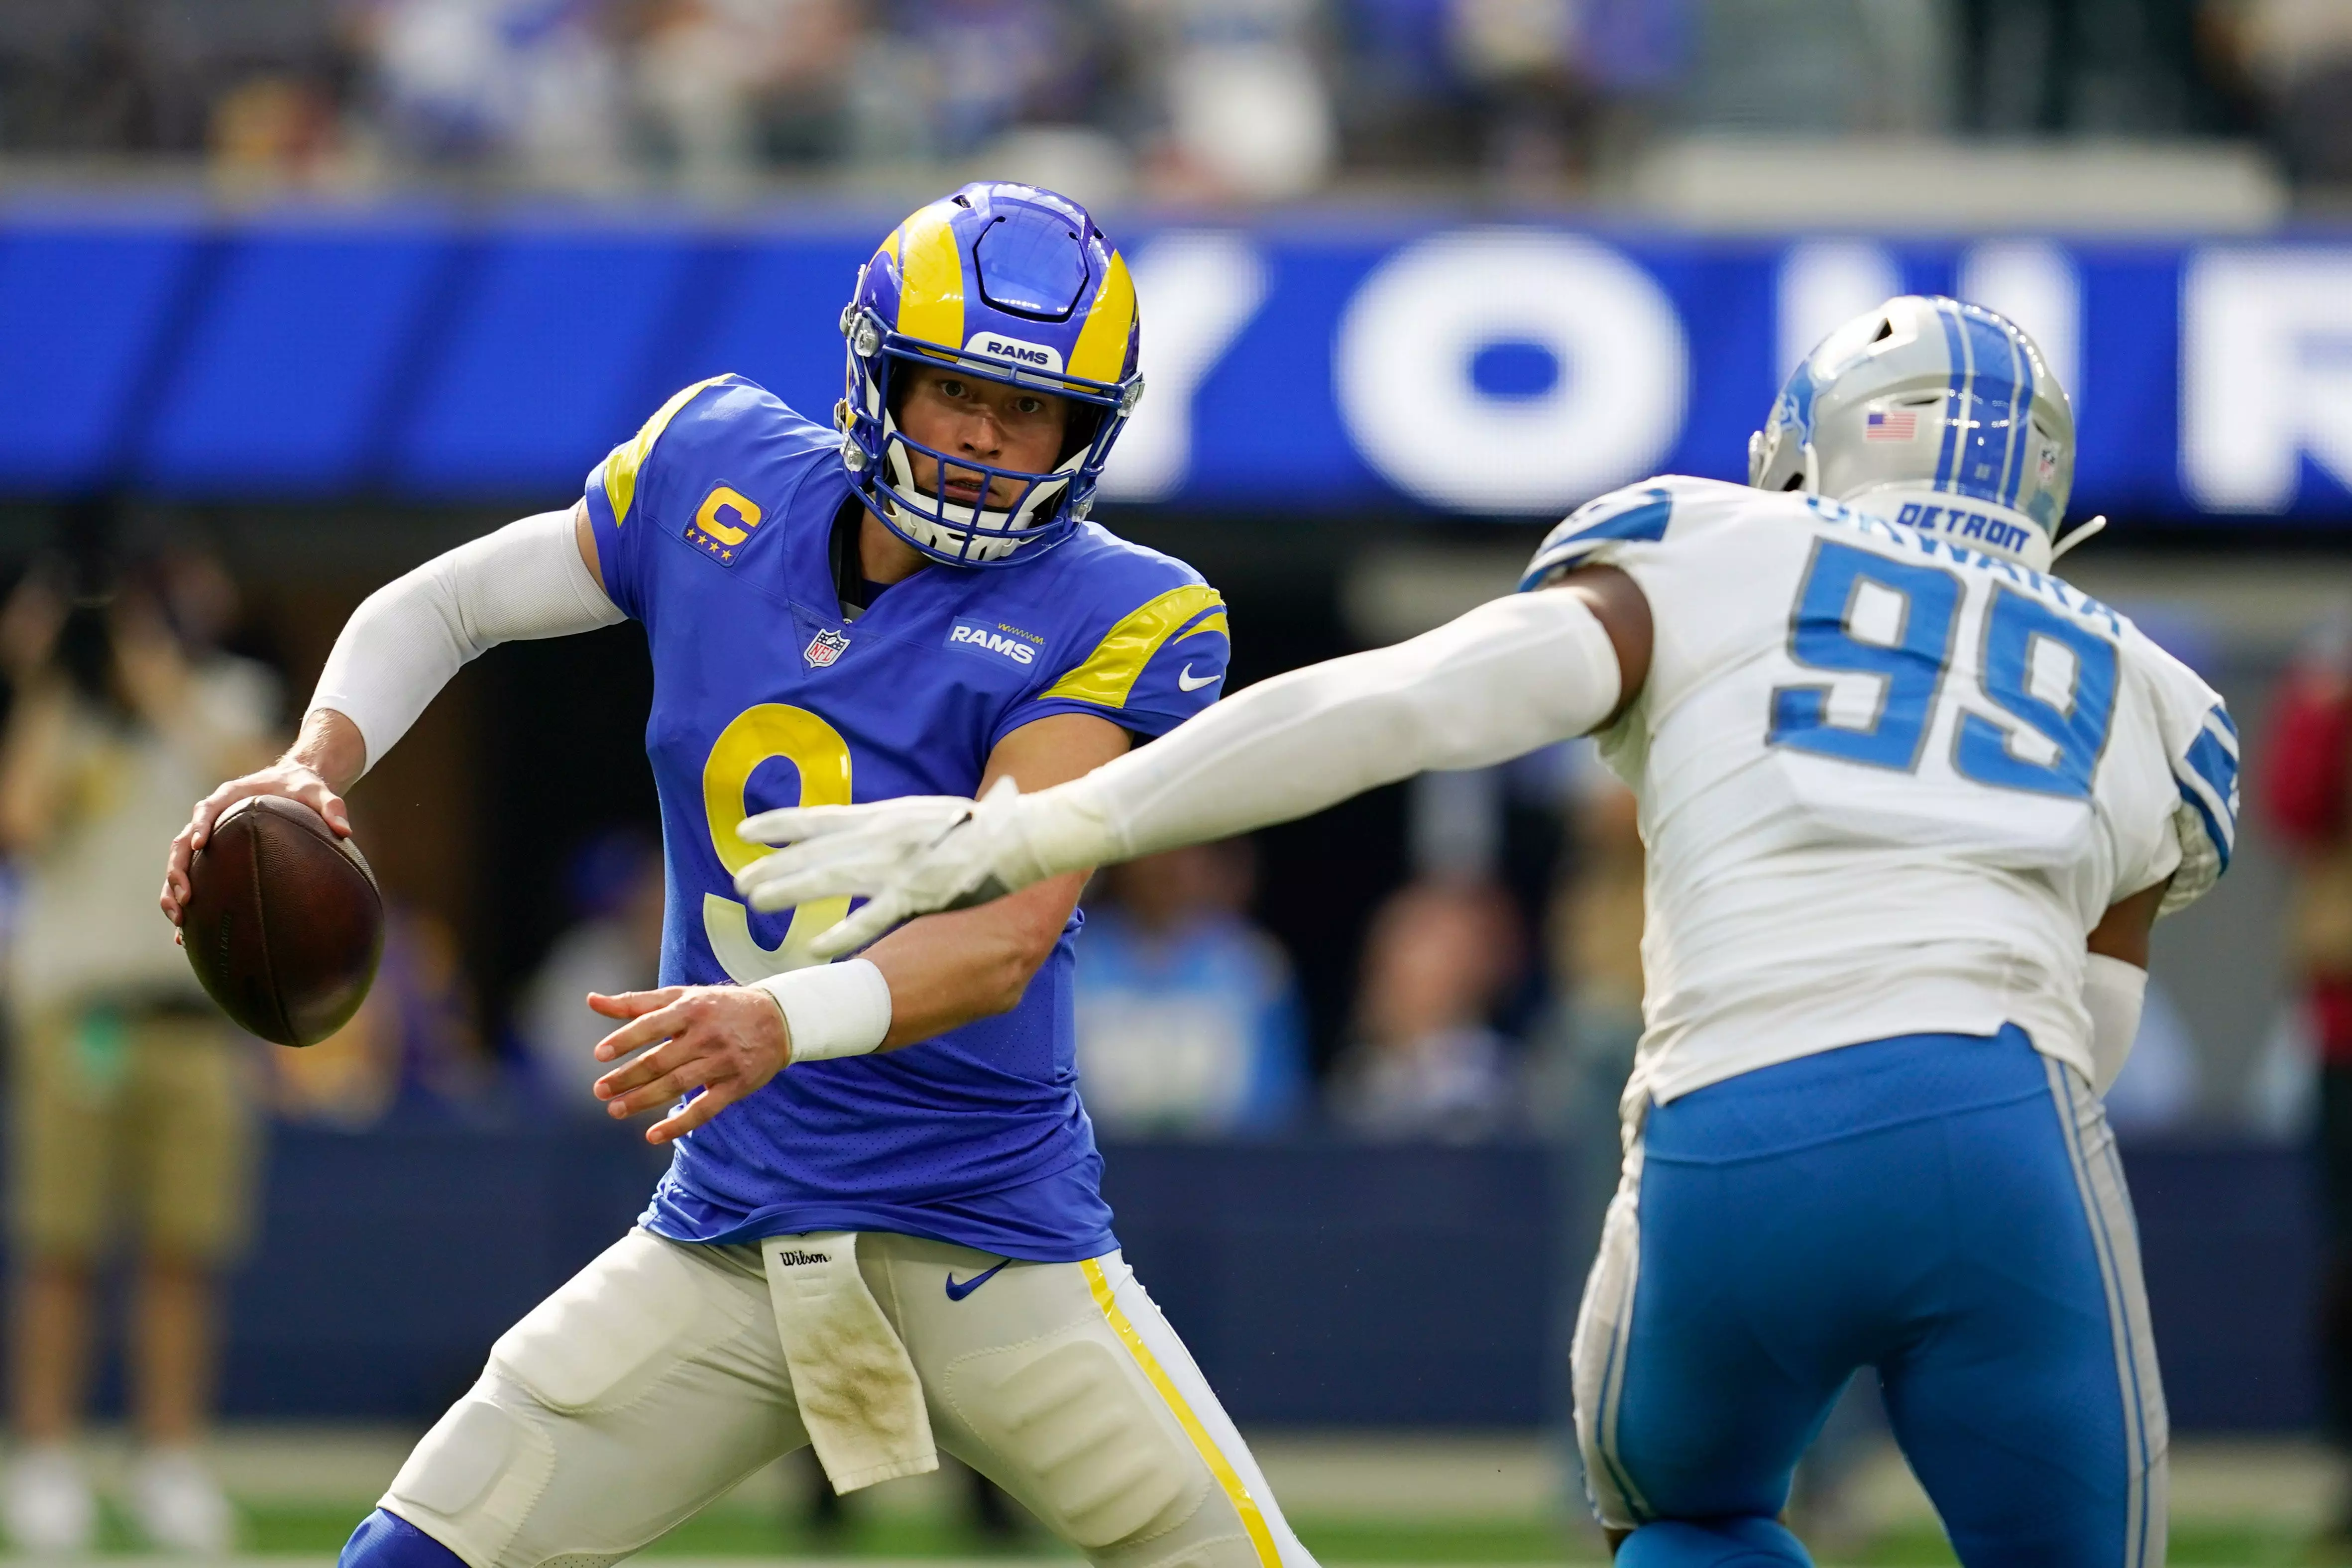 The Los Angeles Rams vs. Detroit Lions NFL Playoffs game on Sunday can be seen on NBC.